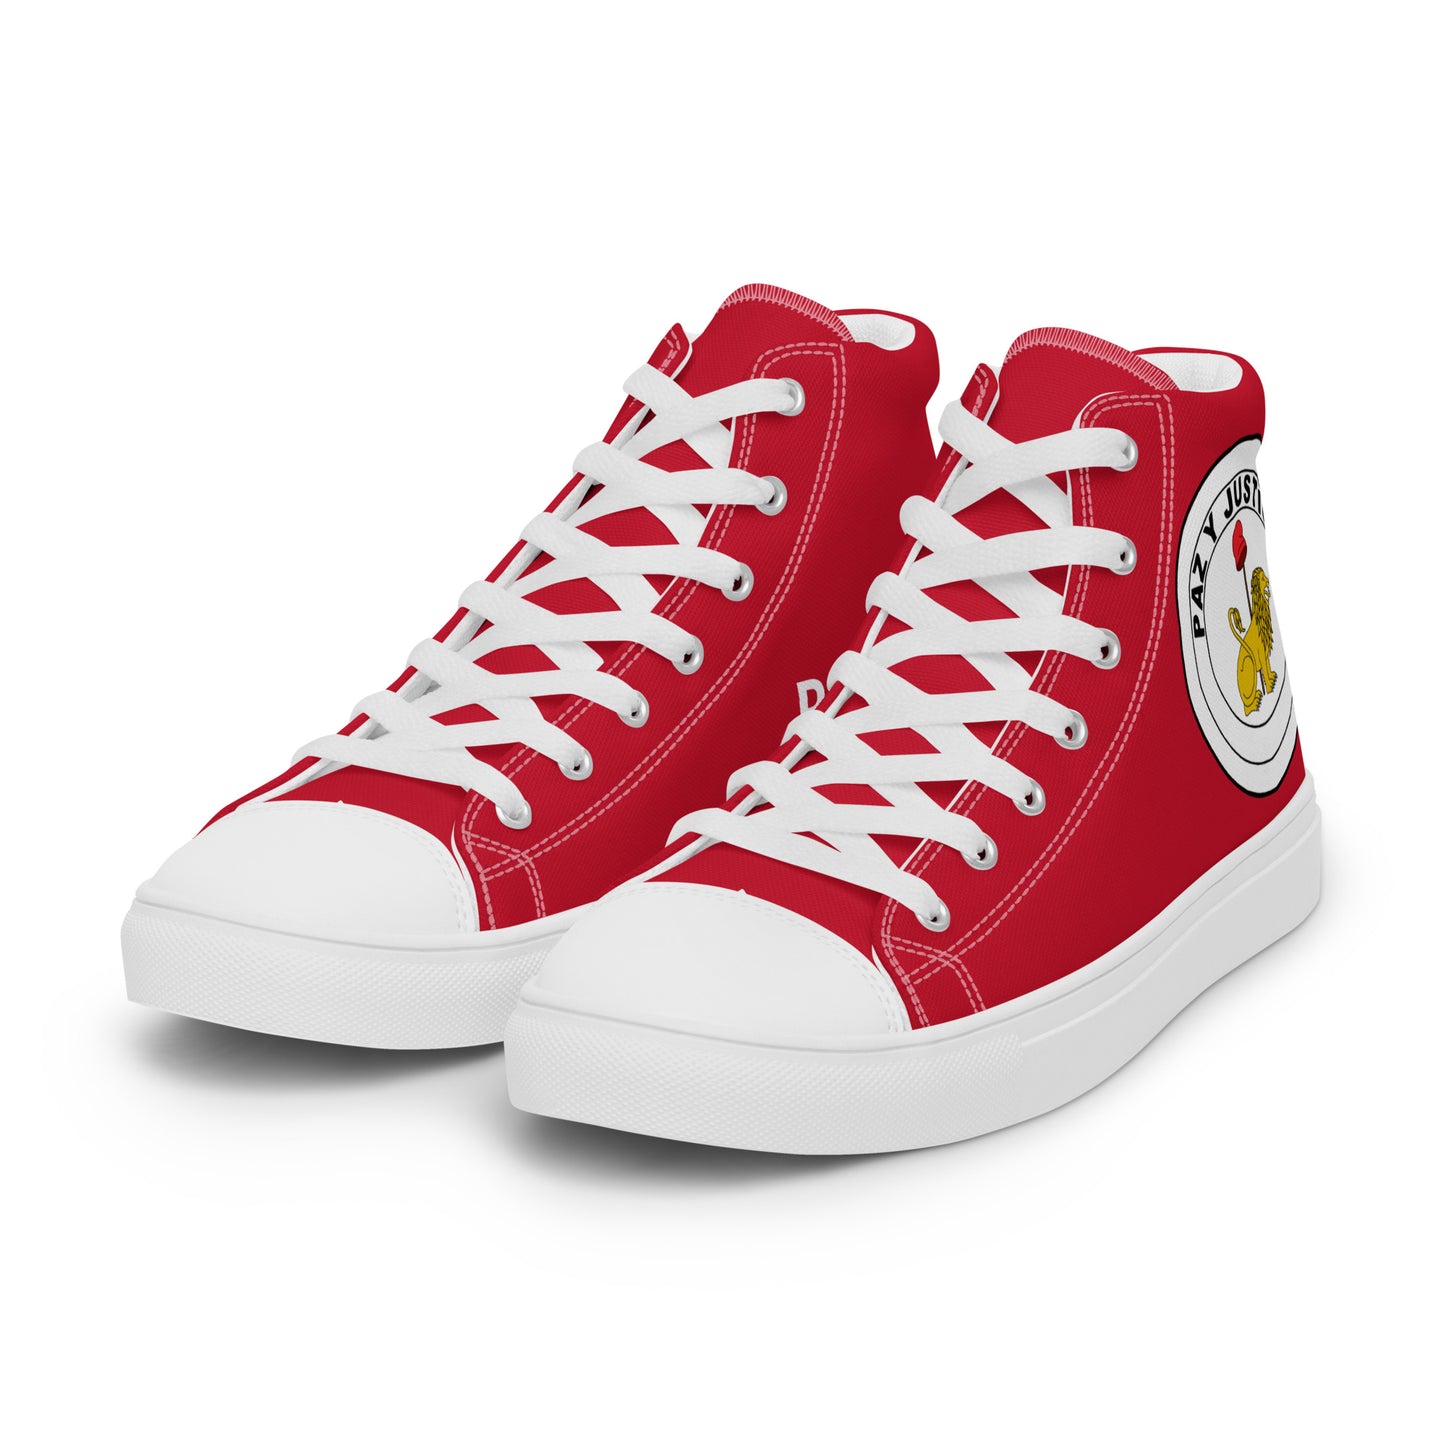 Paraguay - Men - Red - High top shoes